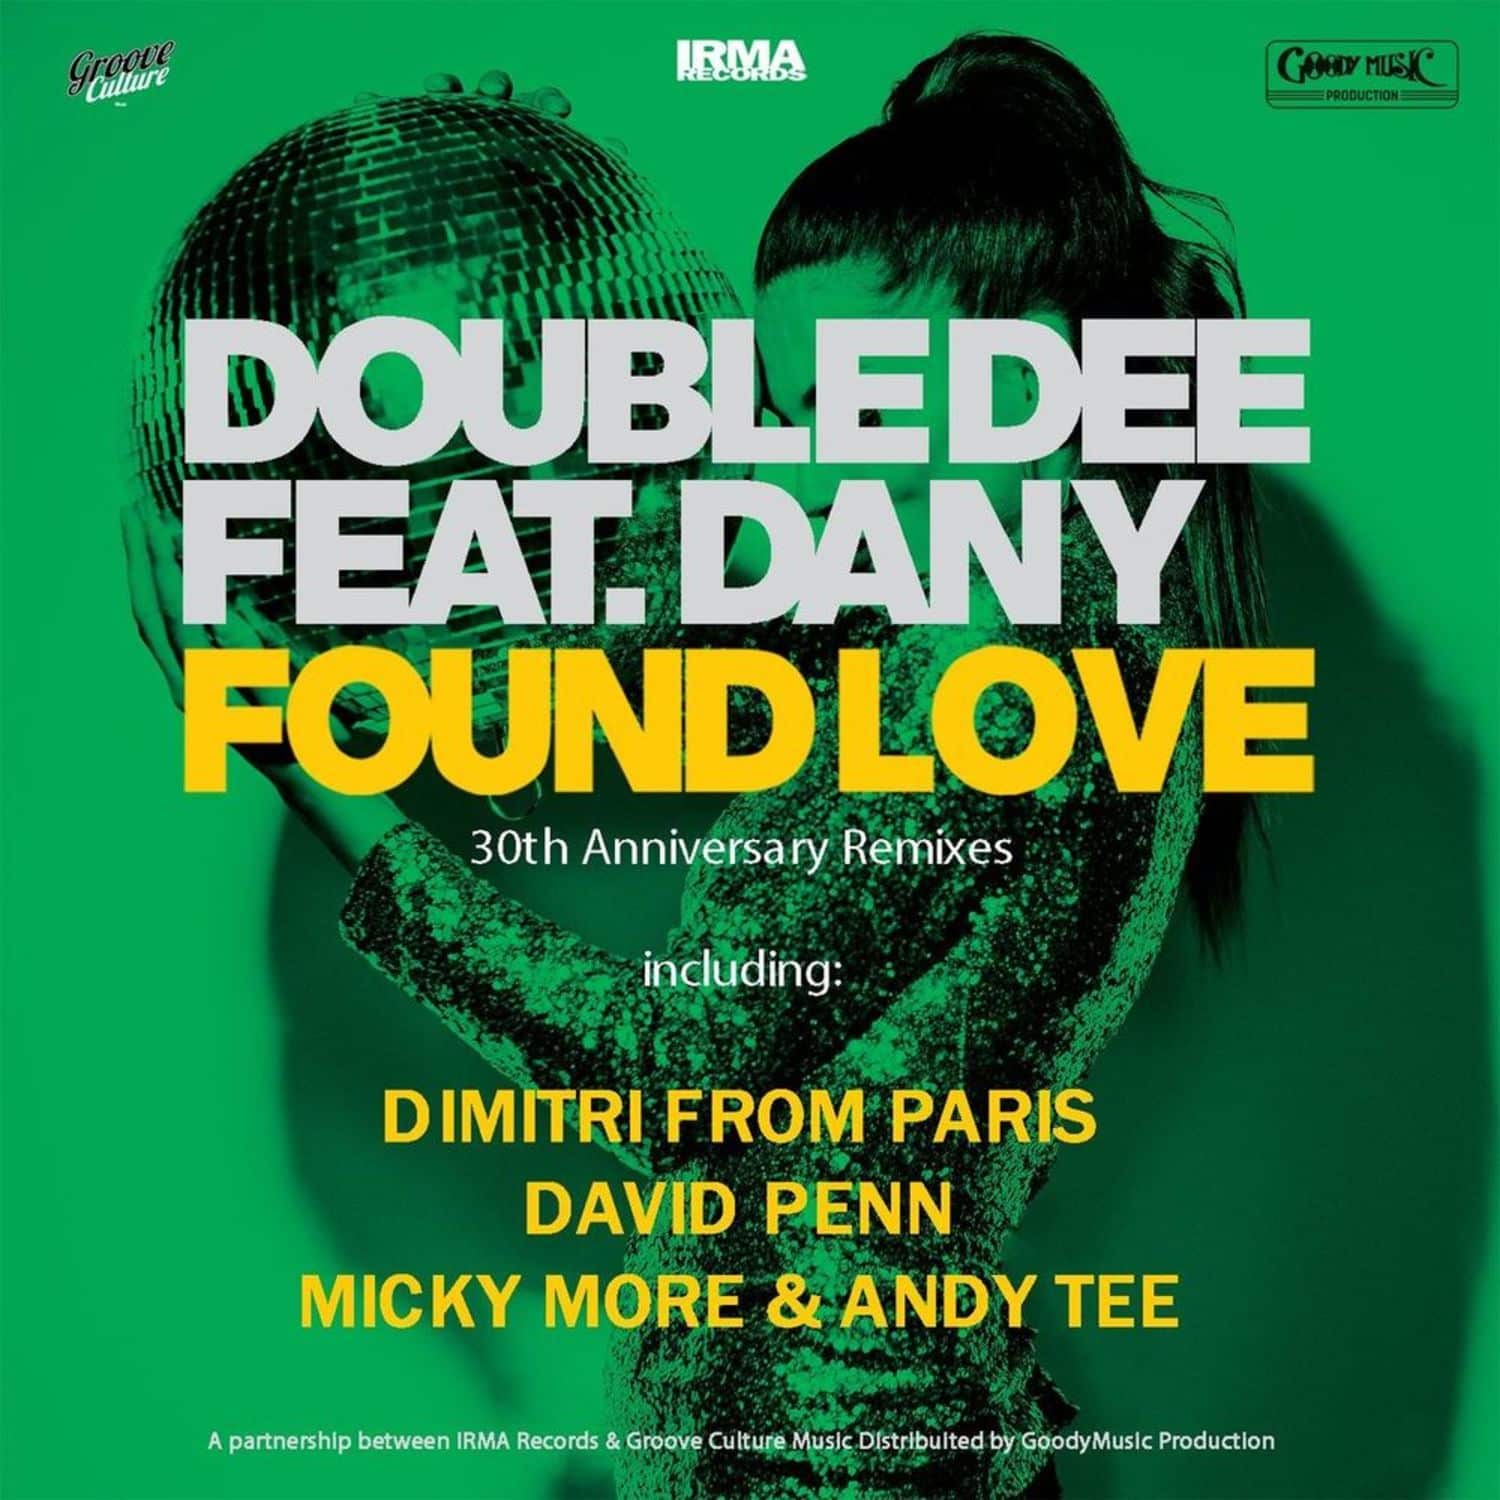 Double Dee ft. Dany - FOUND LOVE 30TH ANNIVERSARY REMIXES 